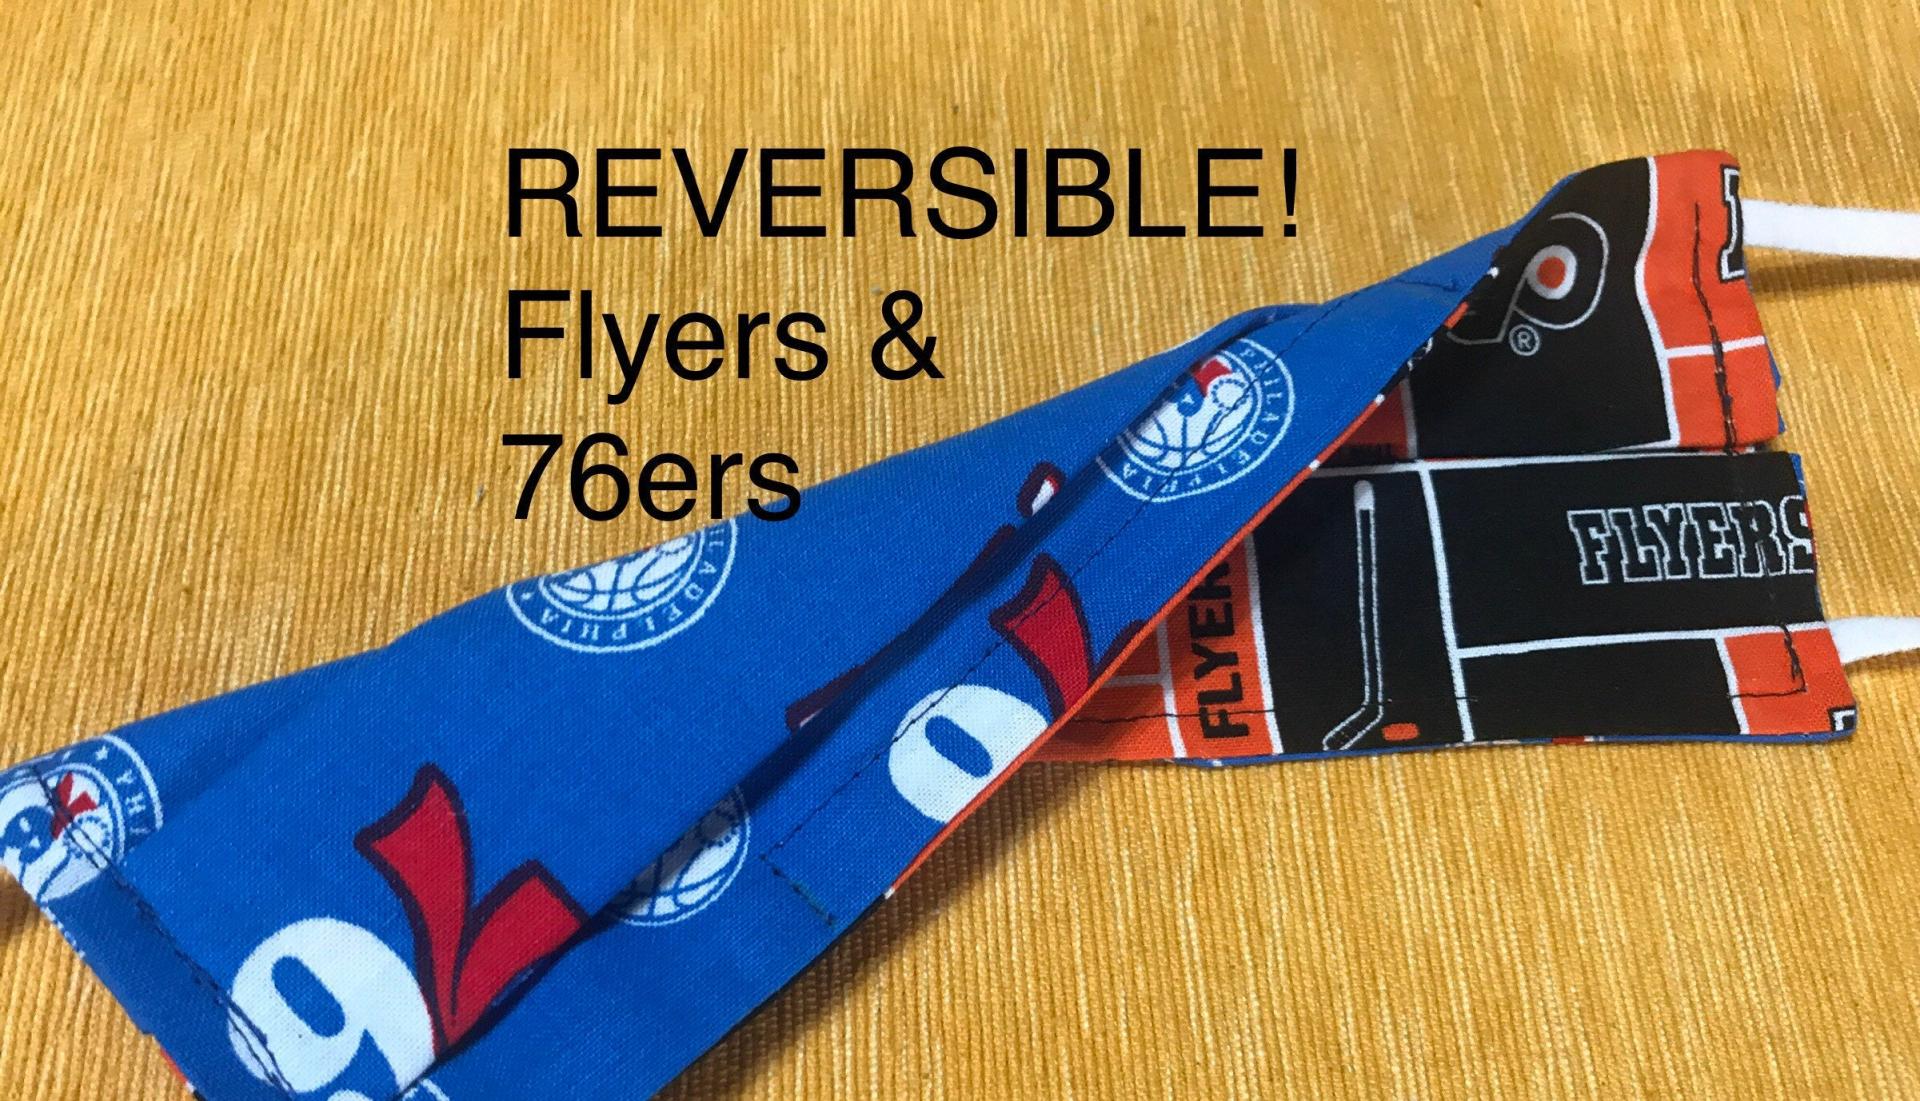 Flyers & 76ers Reversible Face Mask